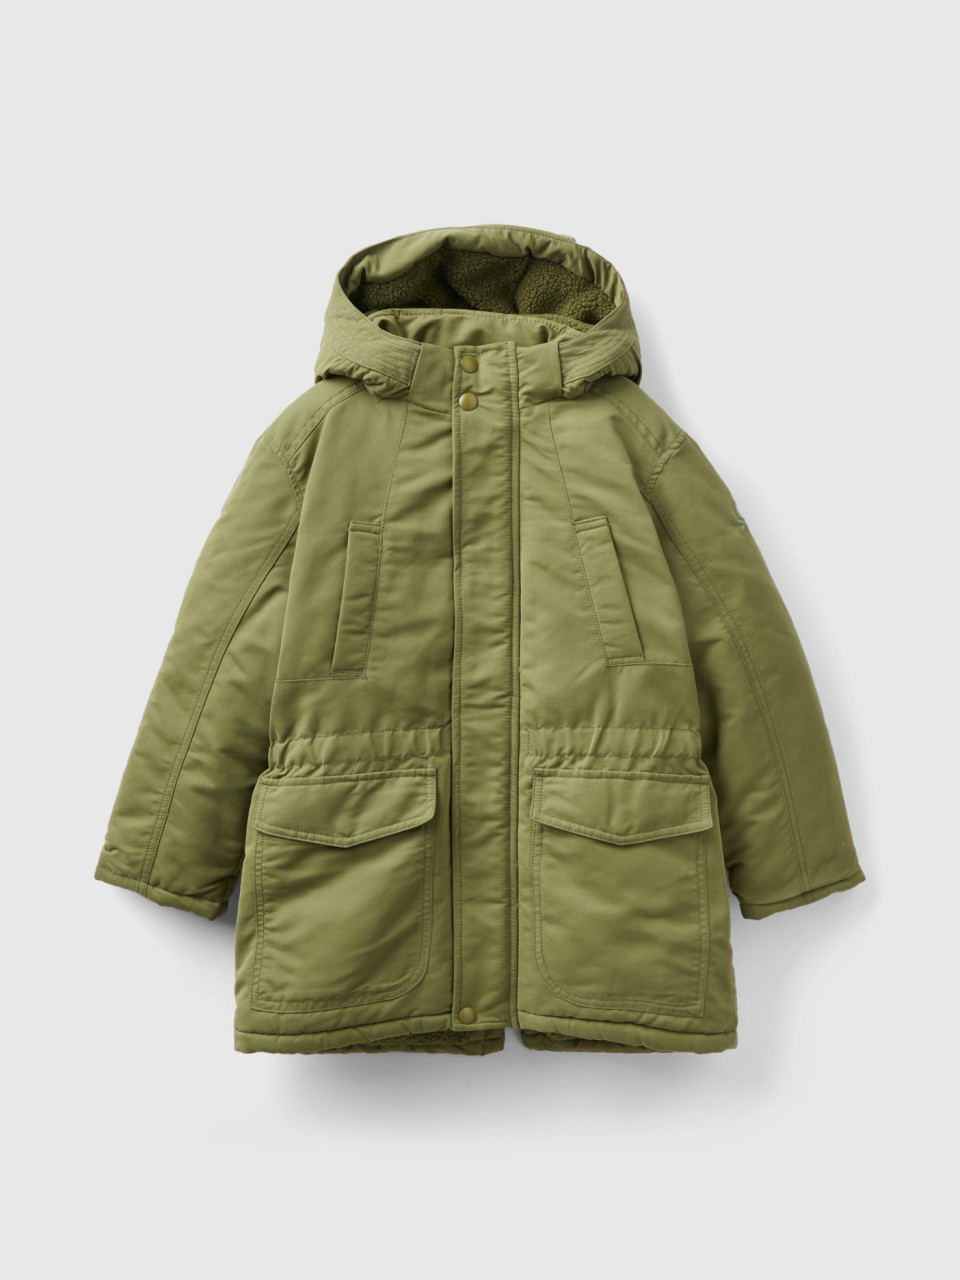 Benetton, Padded Parka With Pockets, Military Green, Kids